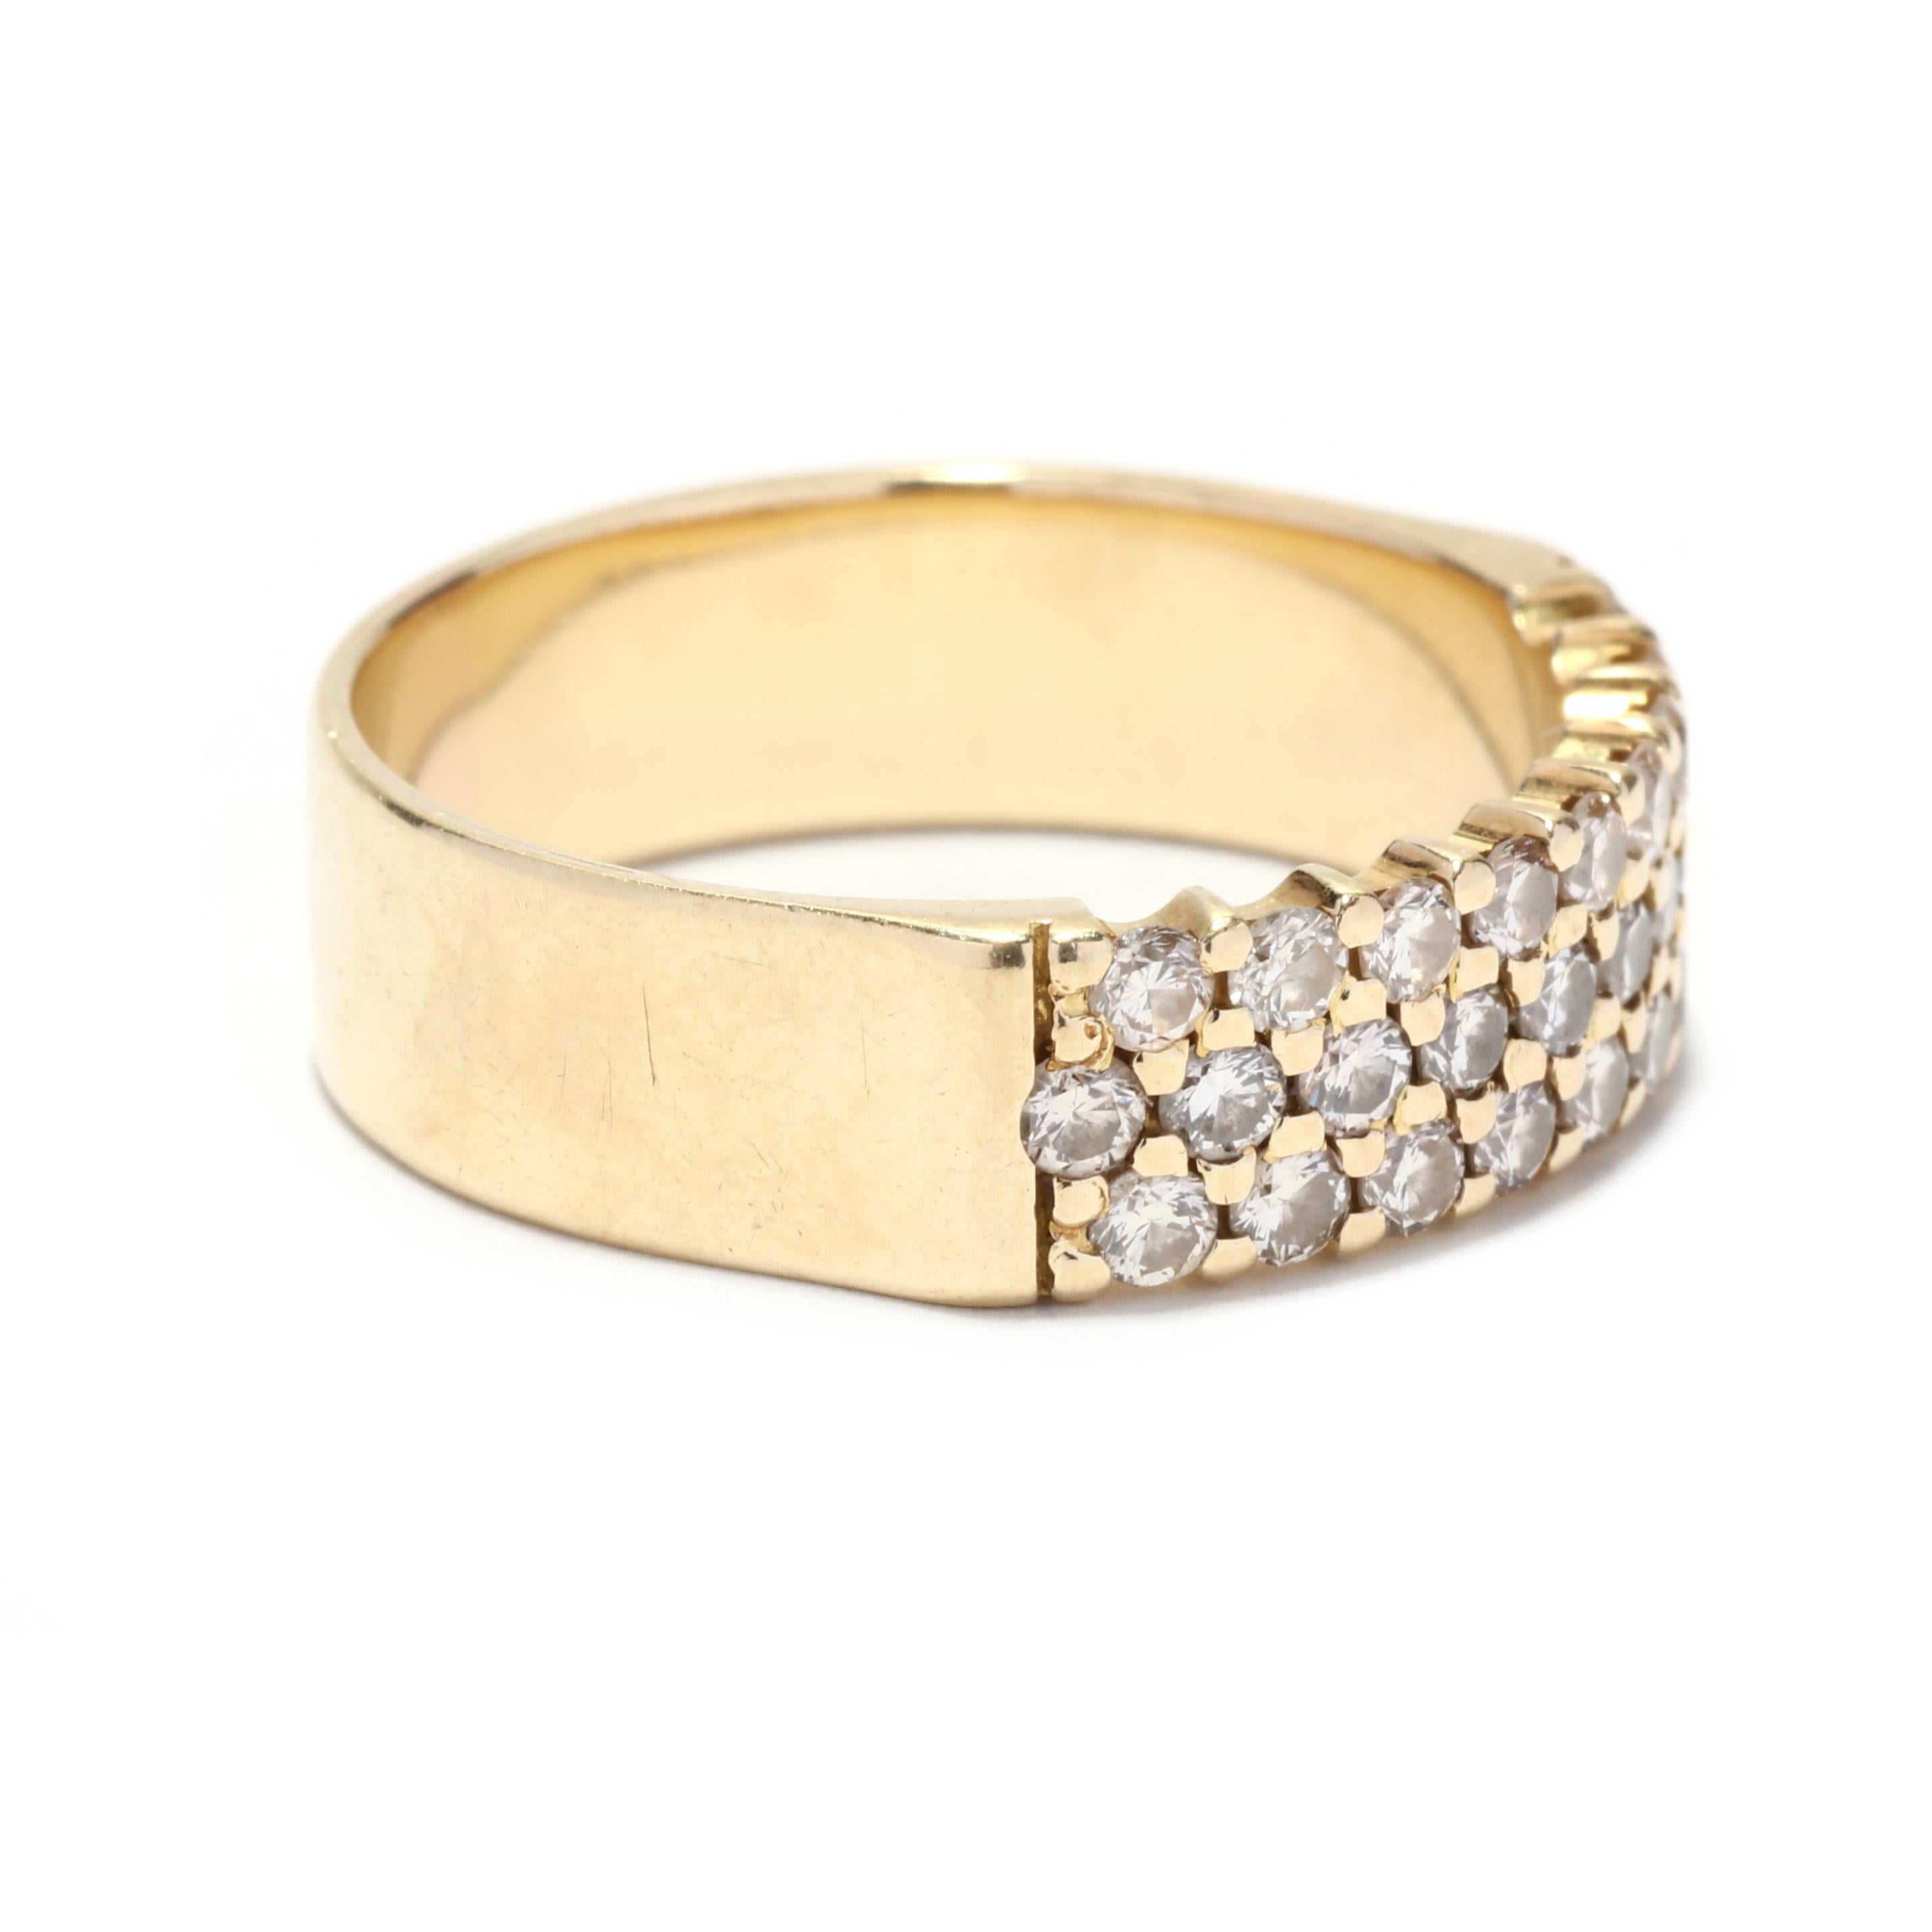 A vintage 14 karat yellow gold three row pavé diamond band ring. This wide band ring features three rows of pavé set round brilliant cut diamonds weighing approximately .75 total carats and with a wide, straight polished band.

Stones:
- diamonds,